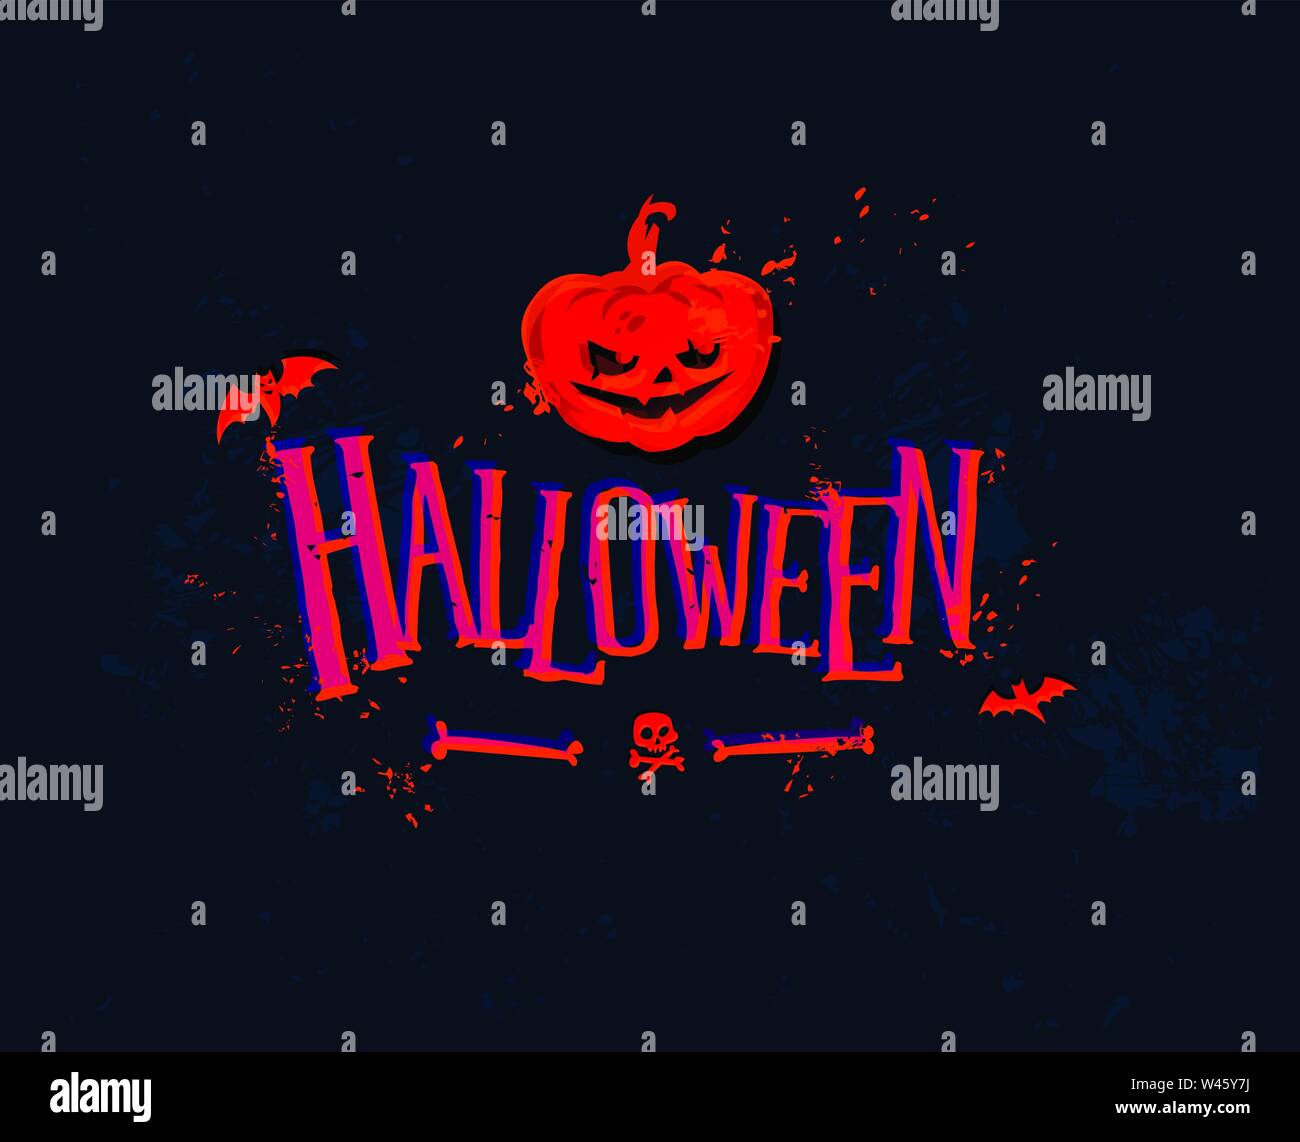 Illustration for the holiday of Halloween. Vector. Orange pumpkin and skull. Capital letters. Uneven font. Scary and terrible illustration for a poste Stock Vector